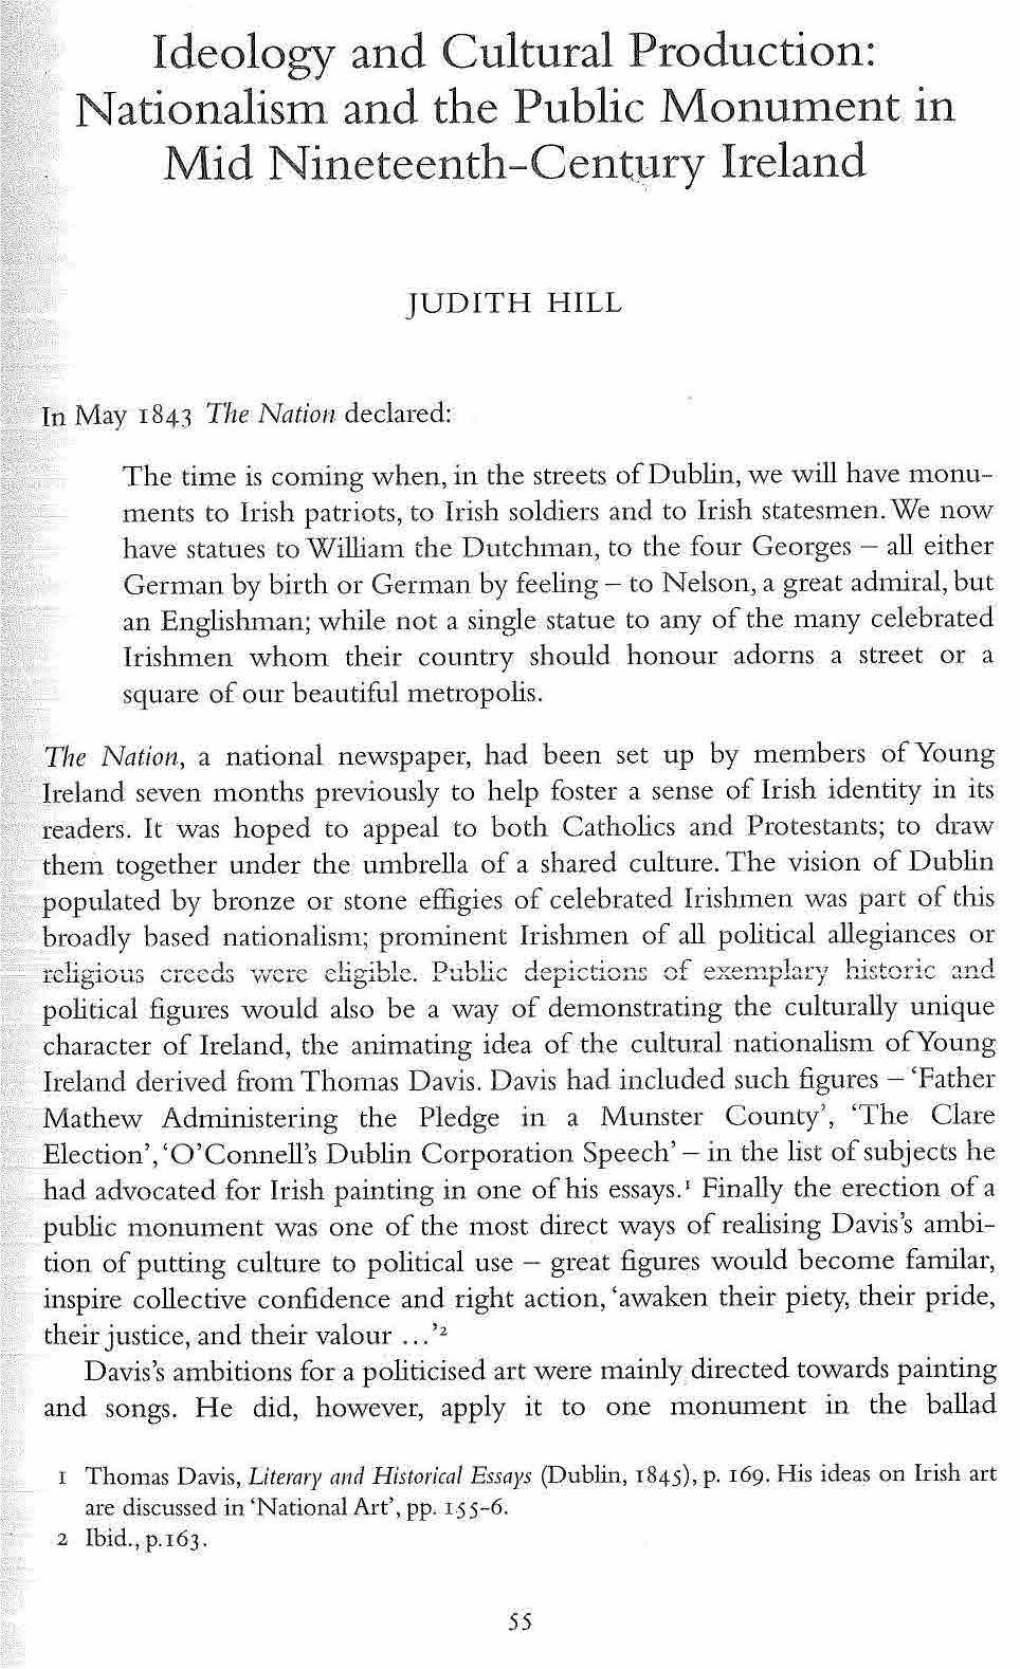 Nationalism and the Public Monument in Mid Nineteenth-Century Ireland